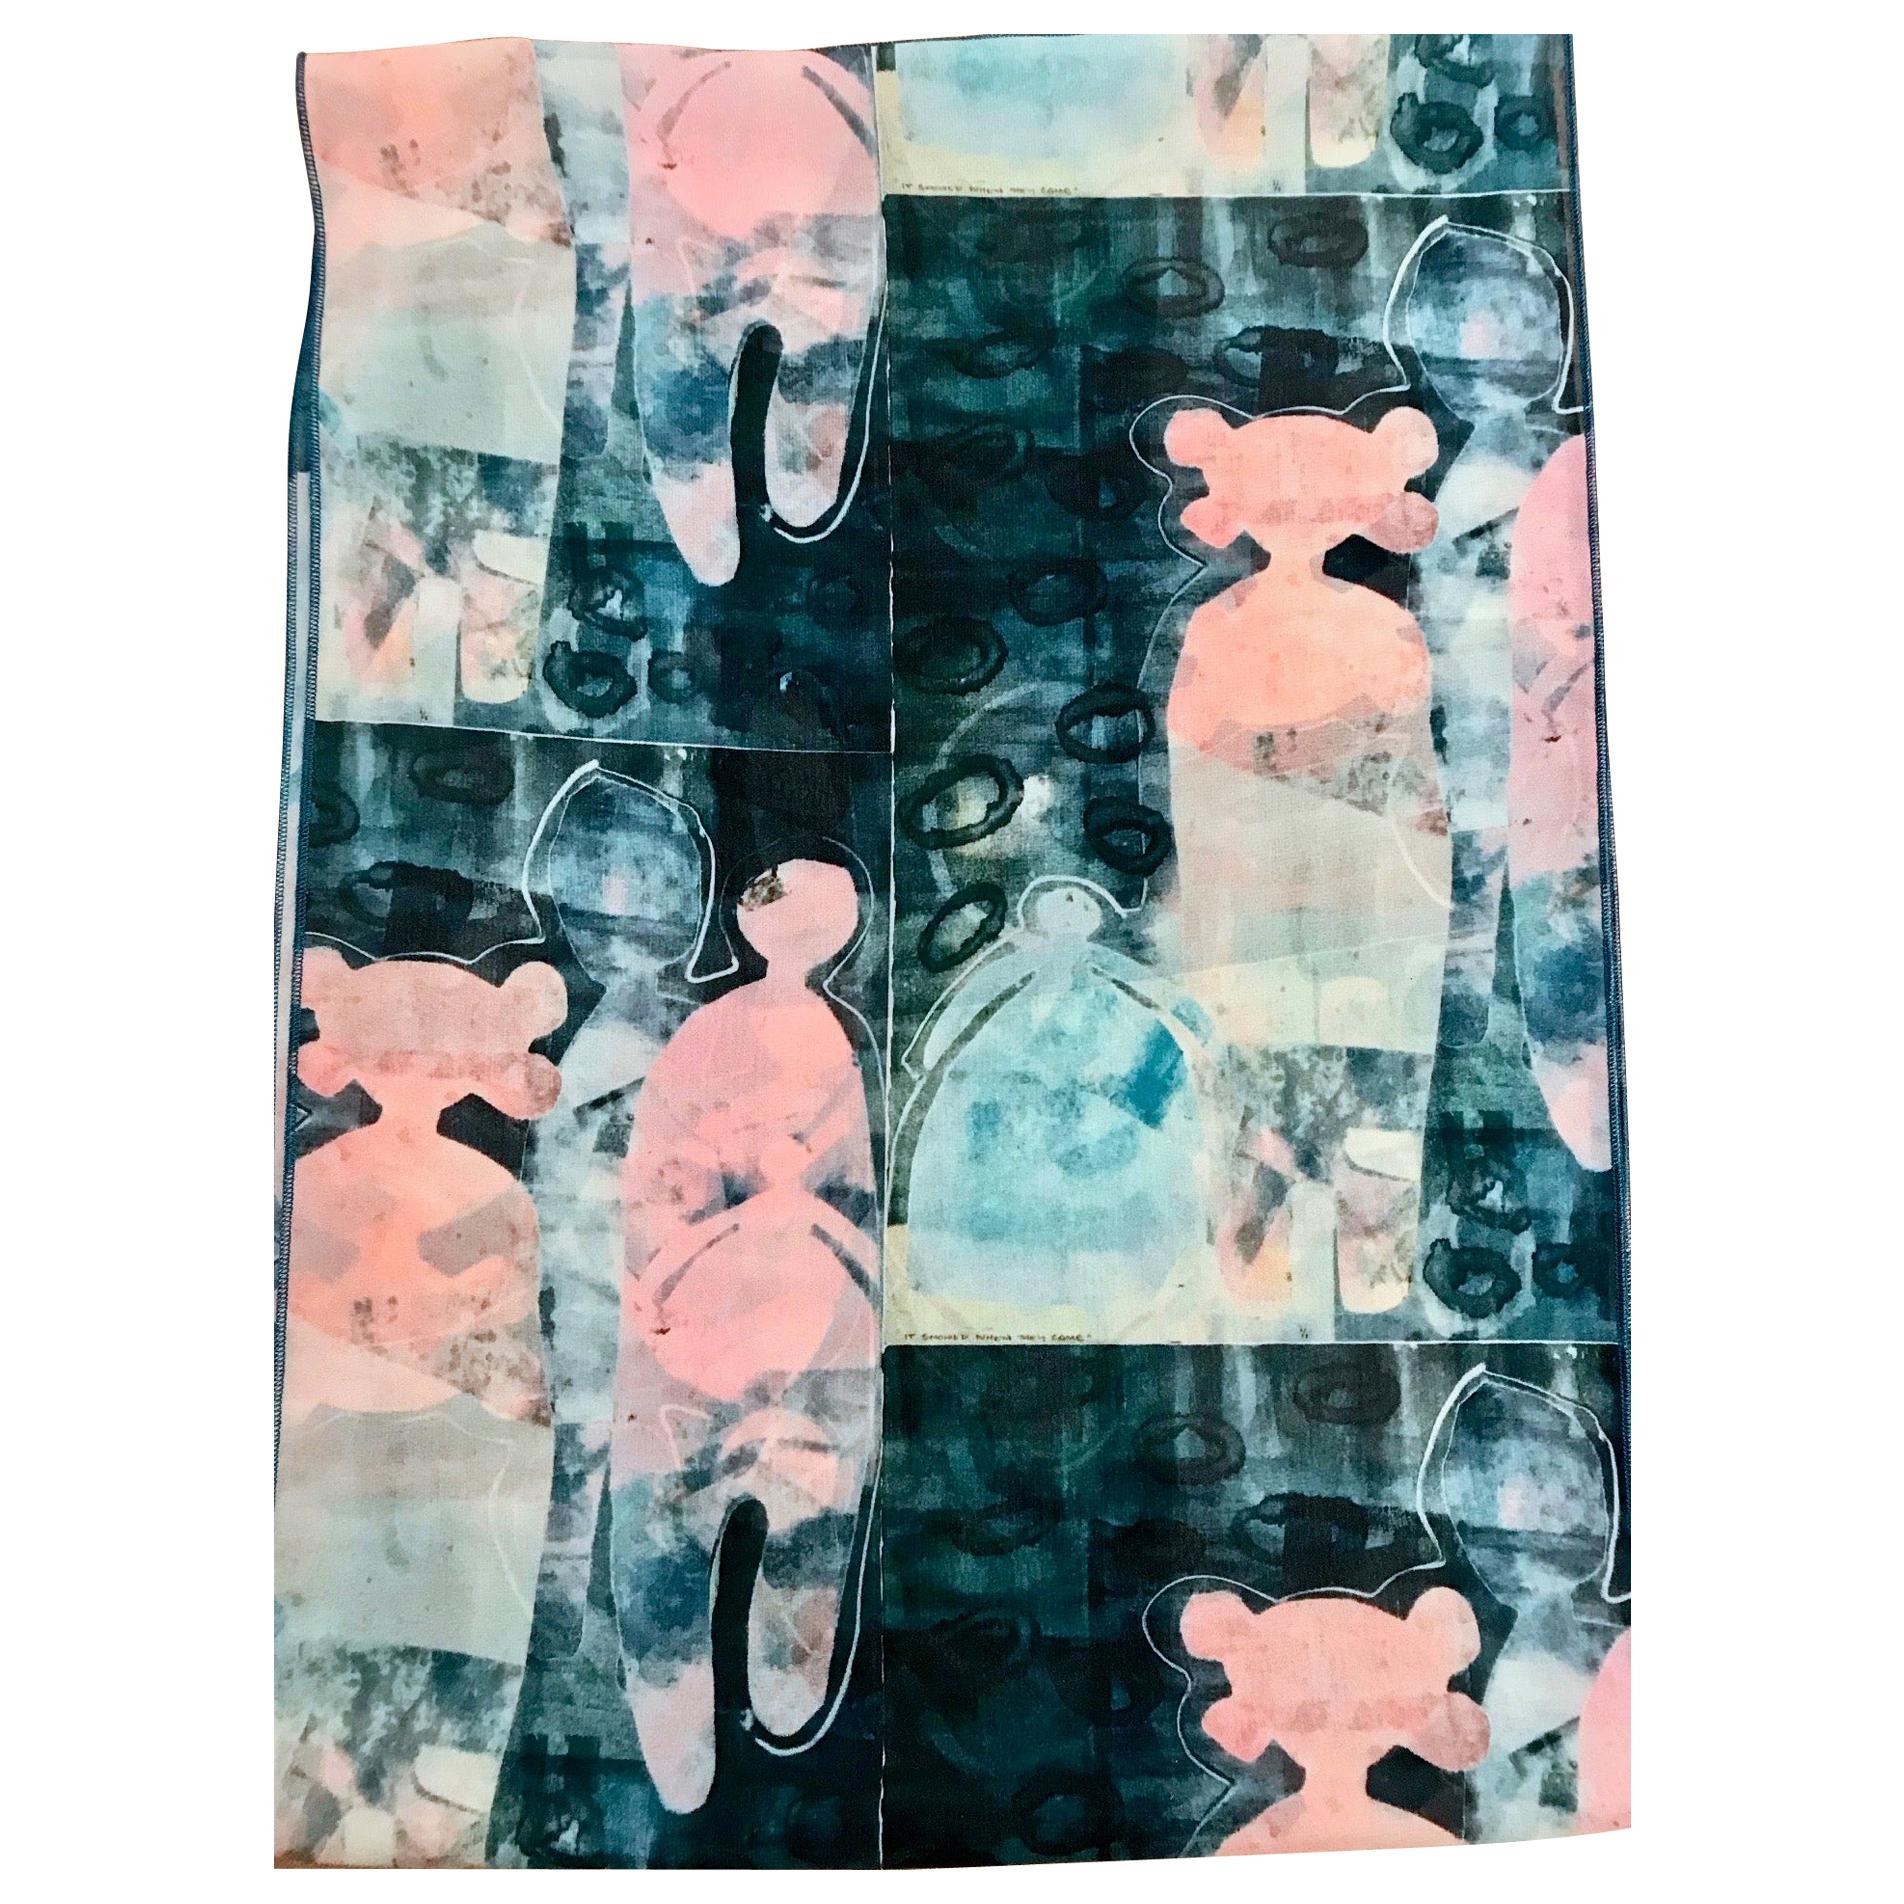 It Snowed When They Came scarf design by Melanie Yazzie chiffon contemporary  For Sale